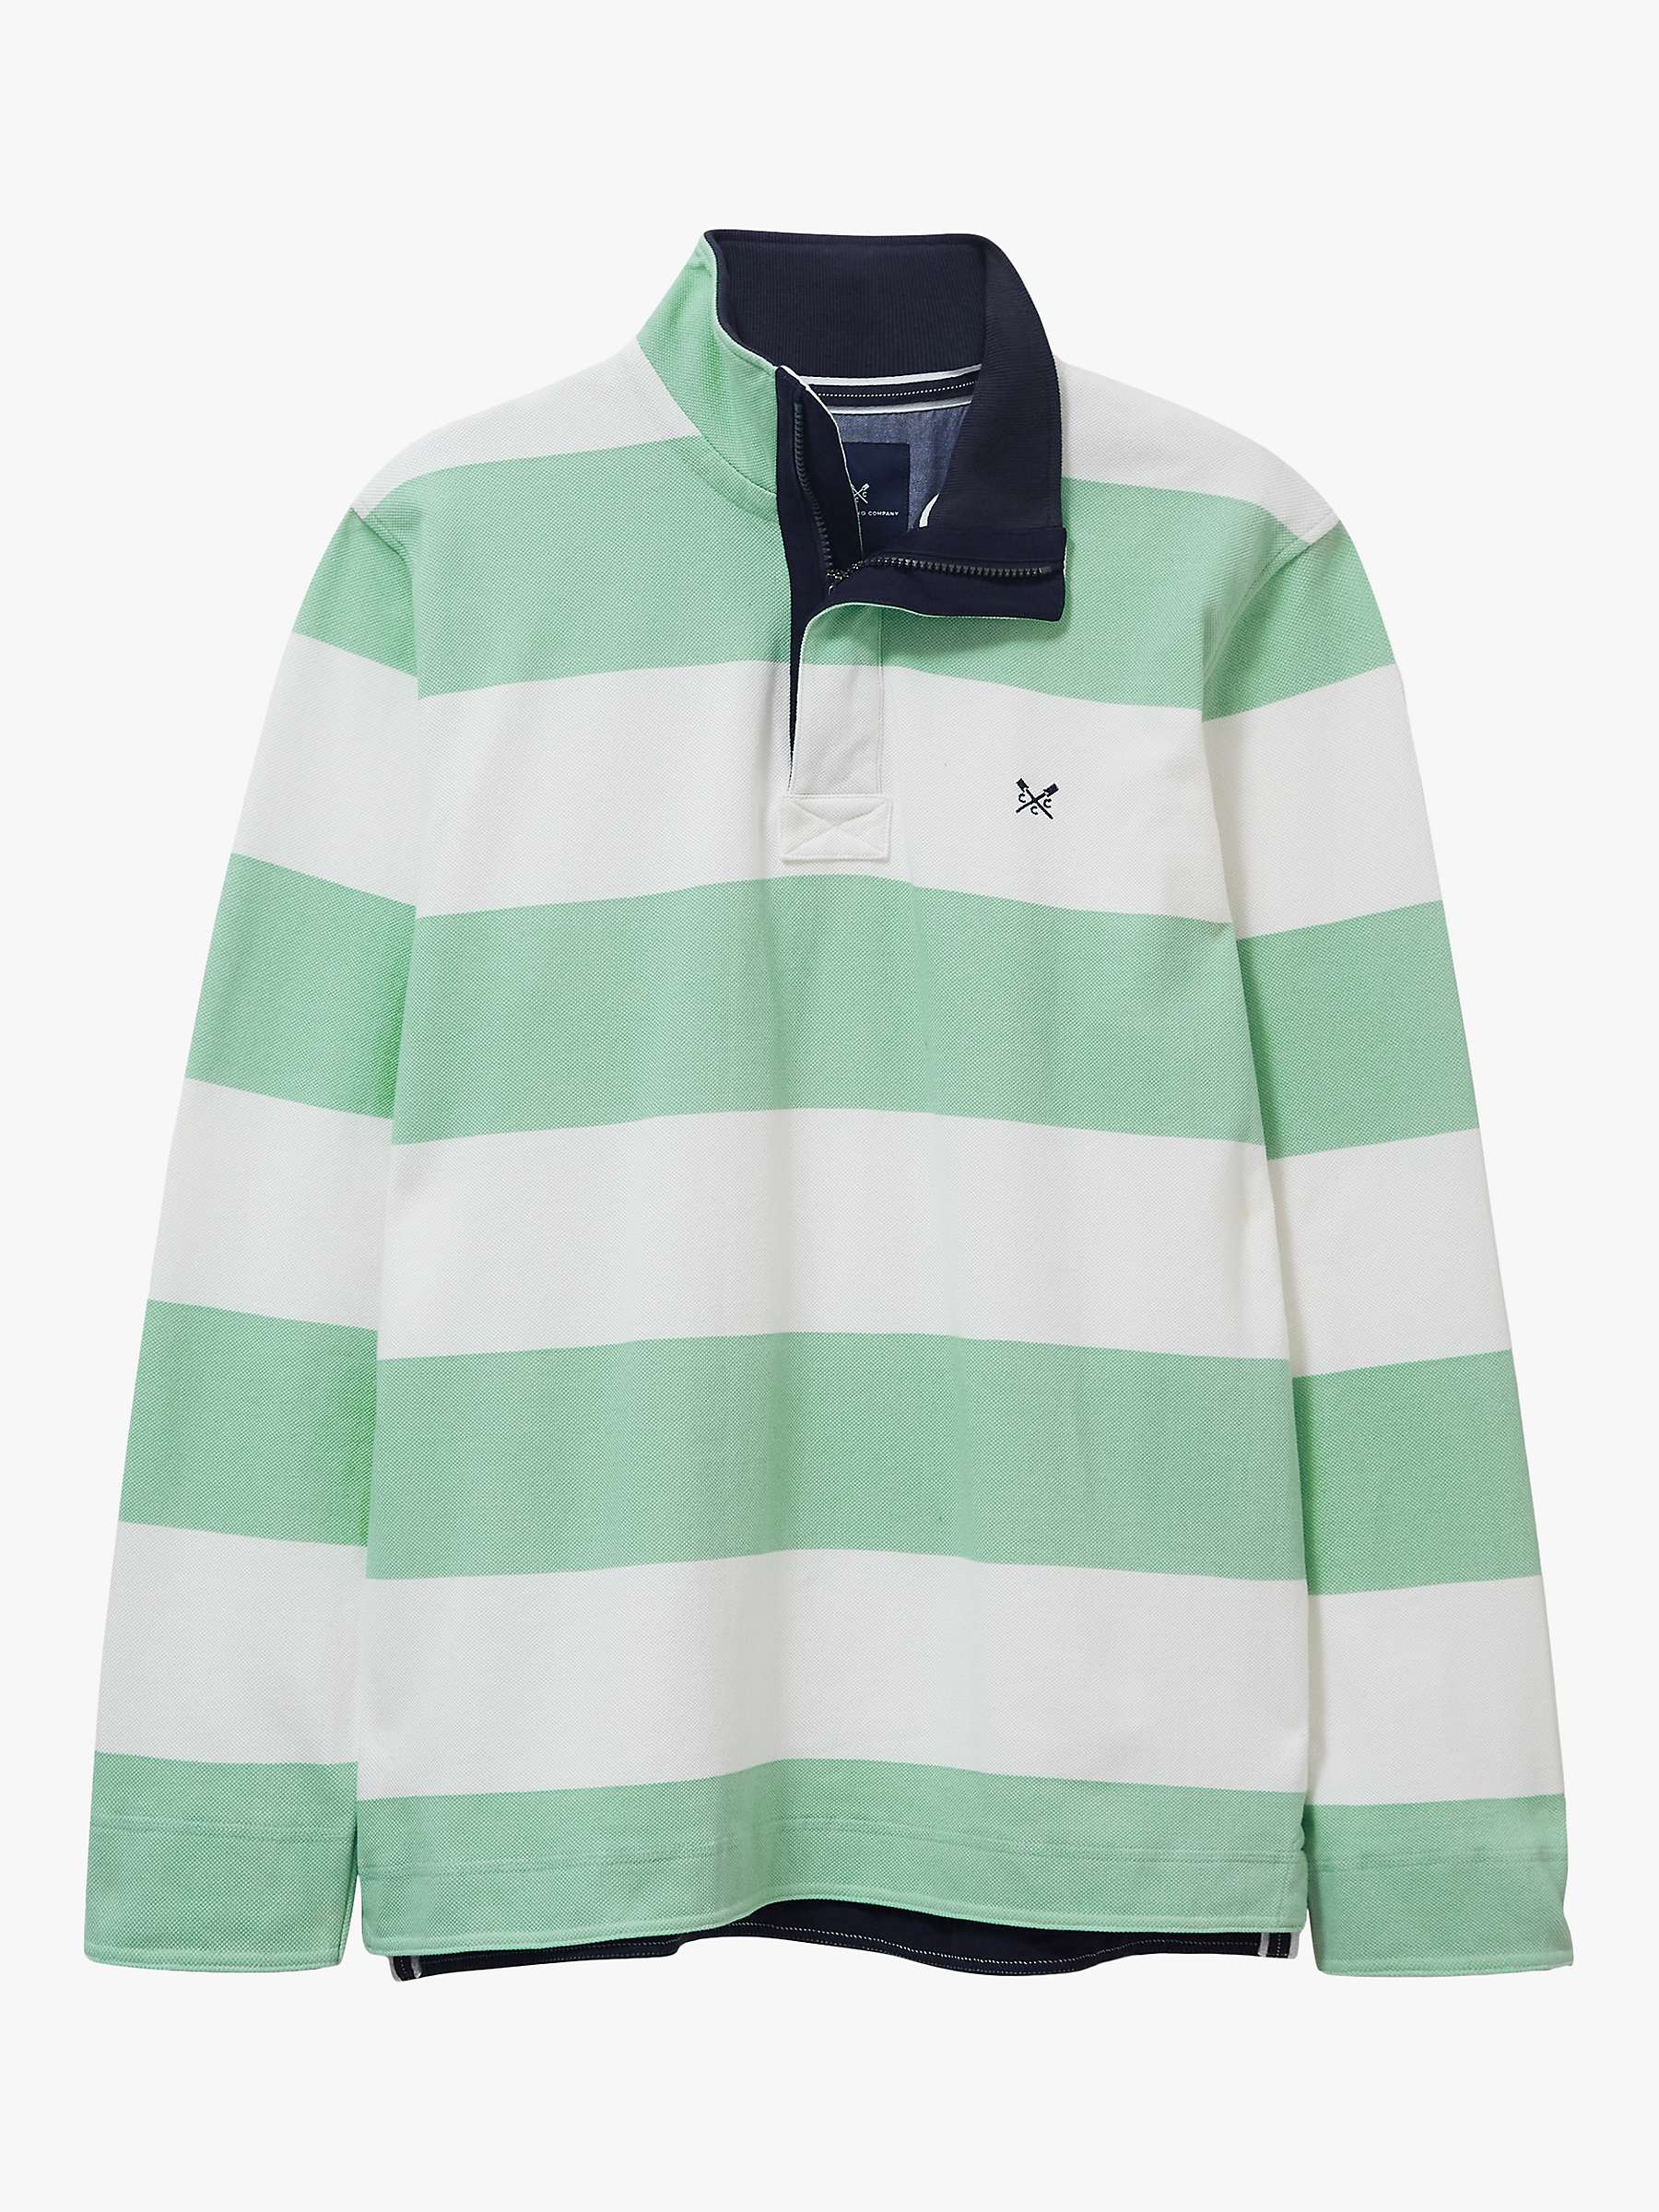 Buy Crew Clothing Lightweight Padstow Striped Sweatshirt, Mint/White Online at johnlewis.com